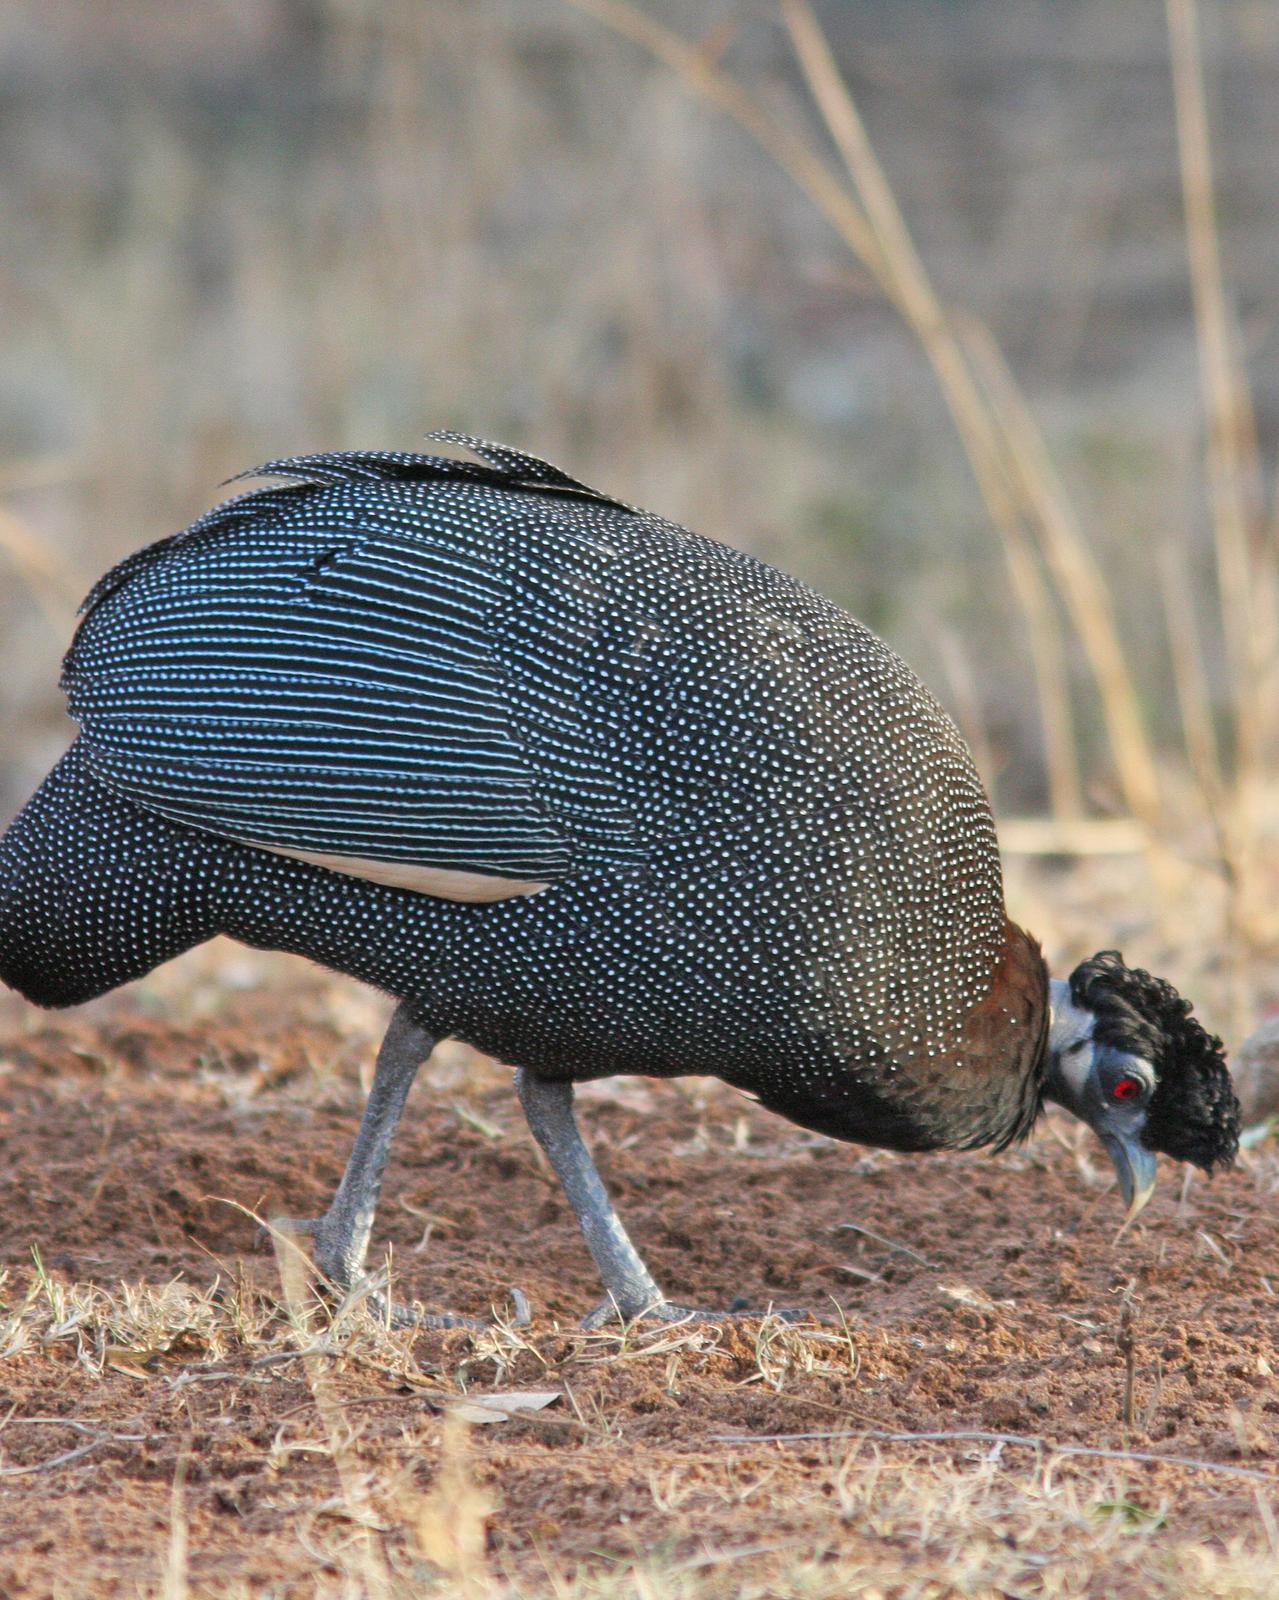 Crested Guineafowl Photo by Henk Baptist